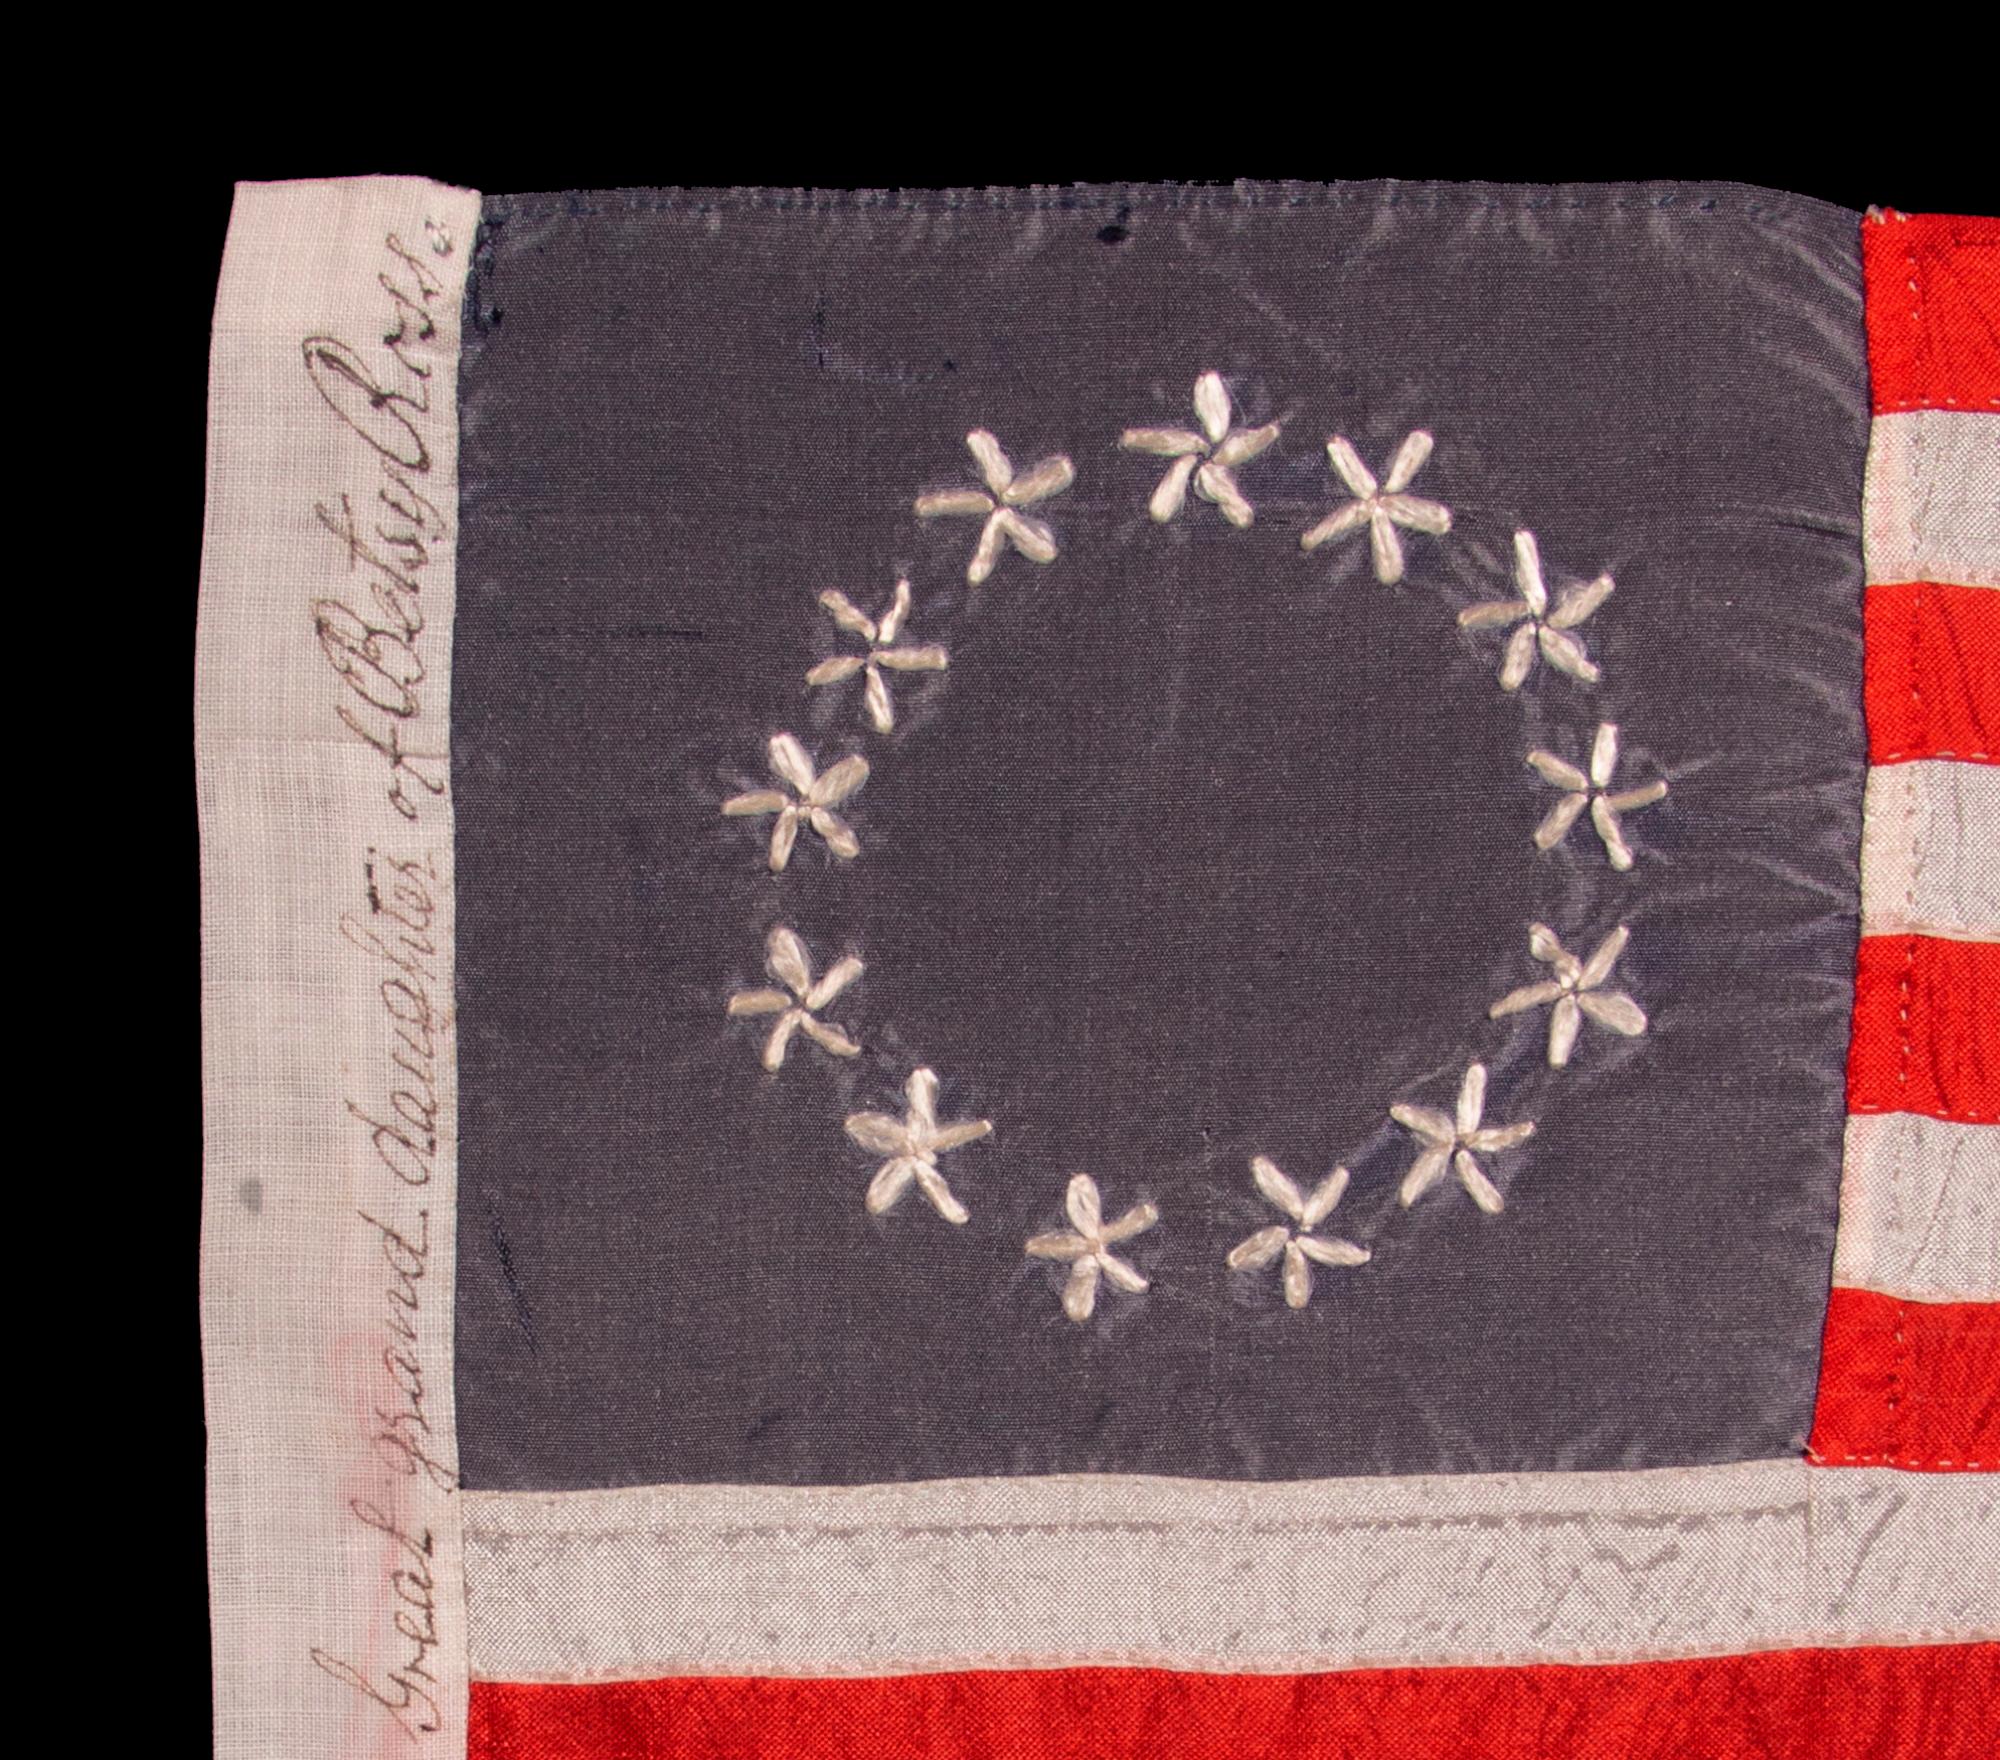 13 HAND-EMBROIDERED STARS AND EXPERTLY HAND-SEWN STRIPES ON AN ANTIQUE AMERICAN FLAG MADE IN PHILADELPHIA BY SARAH M. WILSON, GREAT-GRANDDAUGHTER OF BETSY ROSS, SIGNED & DATED 1911:

13 star American national flag, entirely hand-sewn by Sarah M.